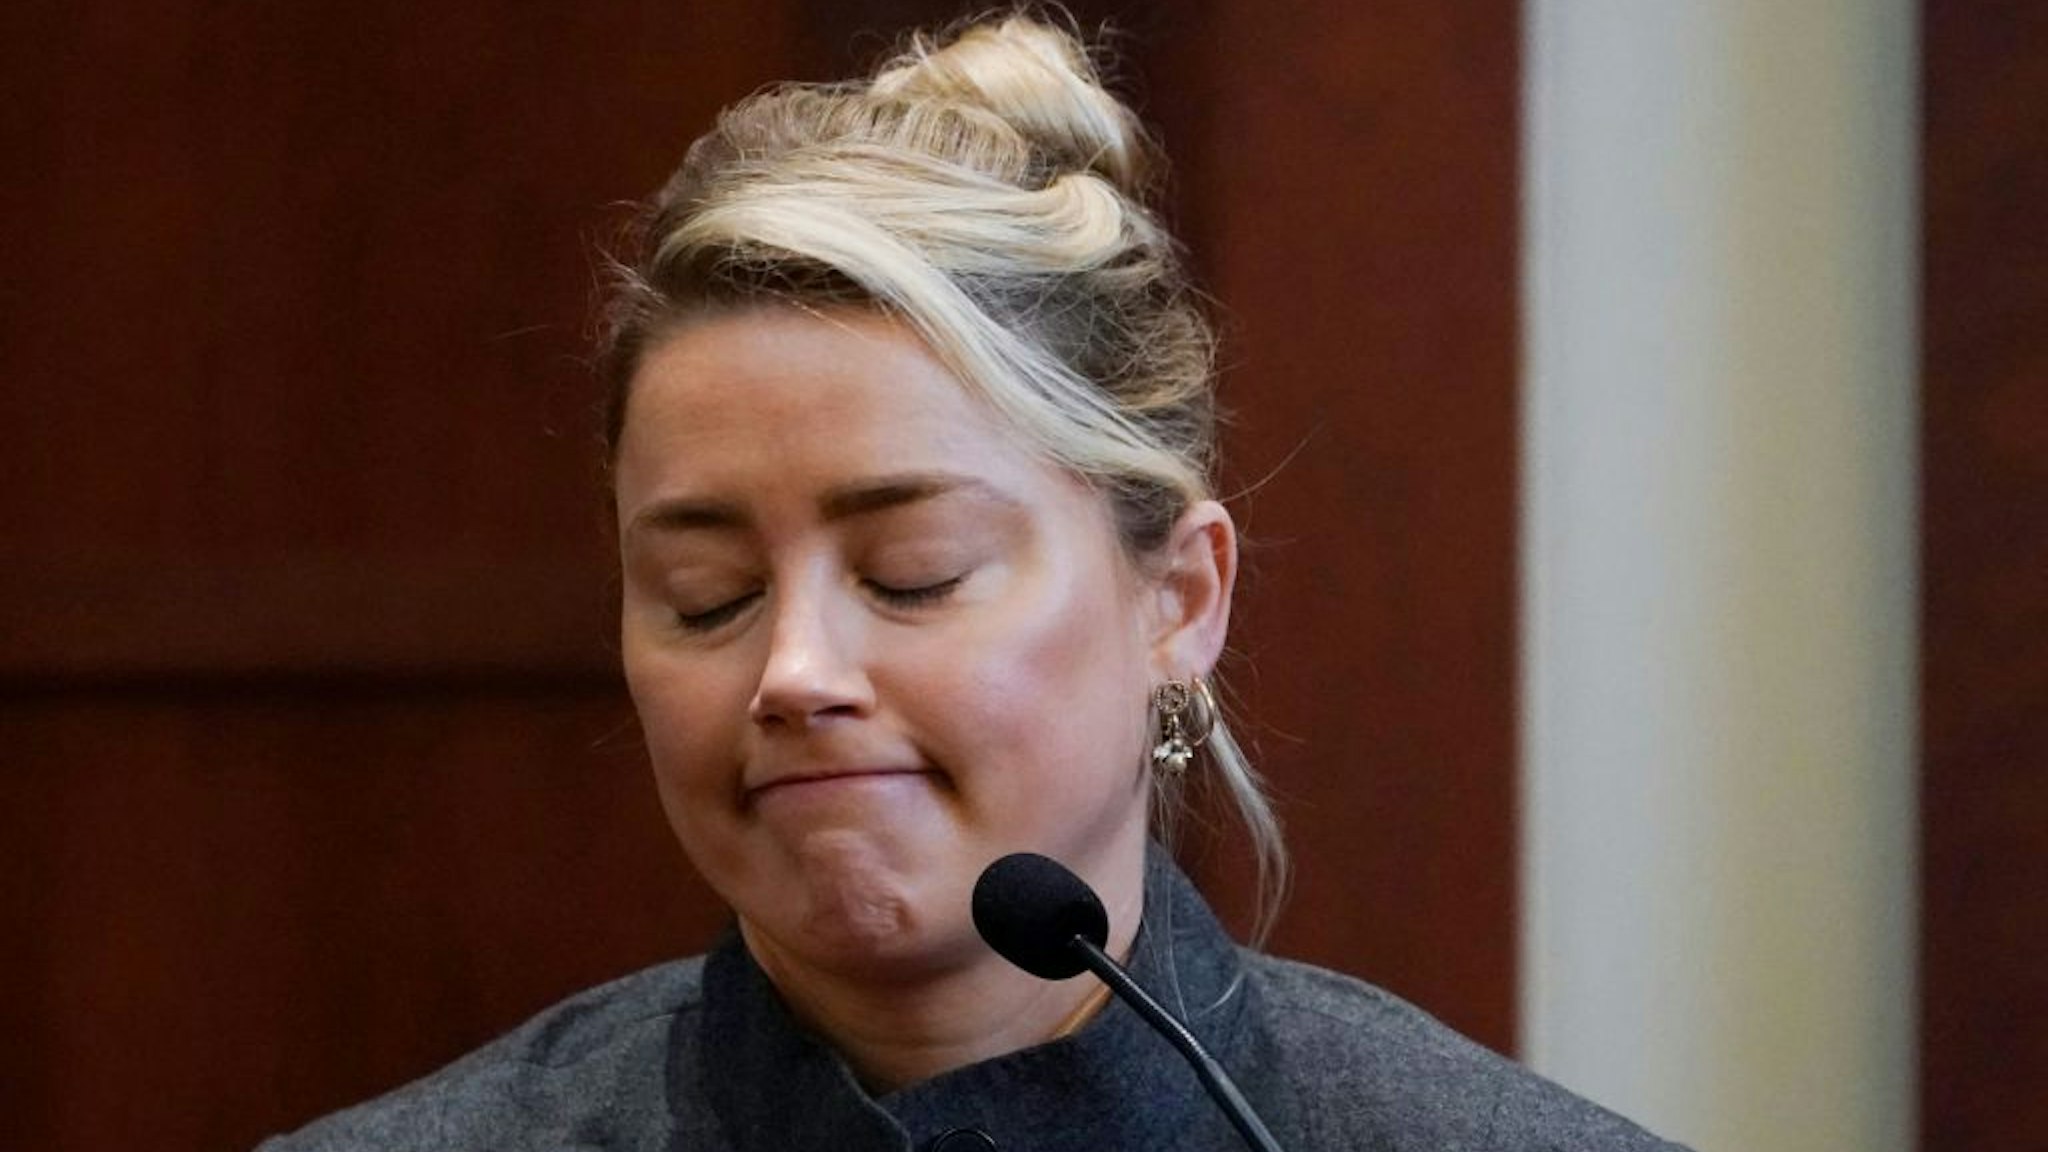 Actor Amber Heard testifies in the courtroom at the Fairfax County Circuit Courthouse in Fairfax, Virginia, on May 16, 2022. - Actor Johnny Depp sued his ex-wife Amber Heard for libel in Fairfax County Circuit Court after she wrote an op-ed piece in The Washington Post in 2018 referring to herself as a "public figure representing domestic abuse." (Photo by Steve Helber / POOL / AFP) (Photo by STEVE HELBER/POOL/AFP via Getty Images)